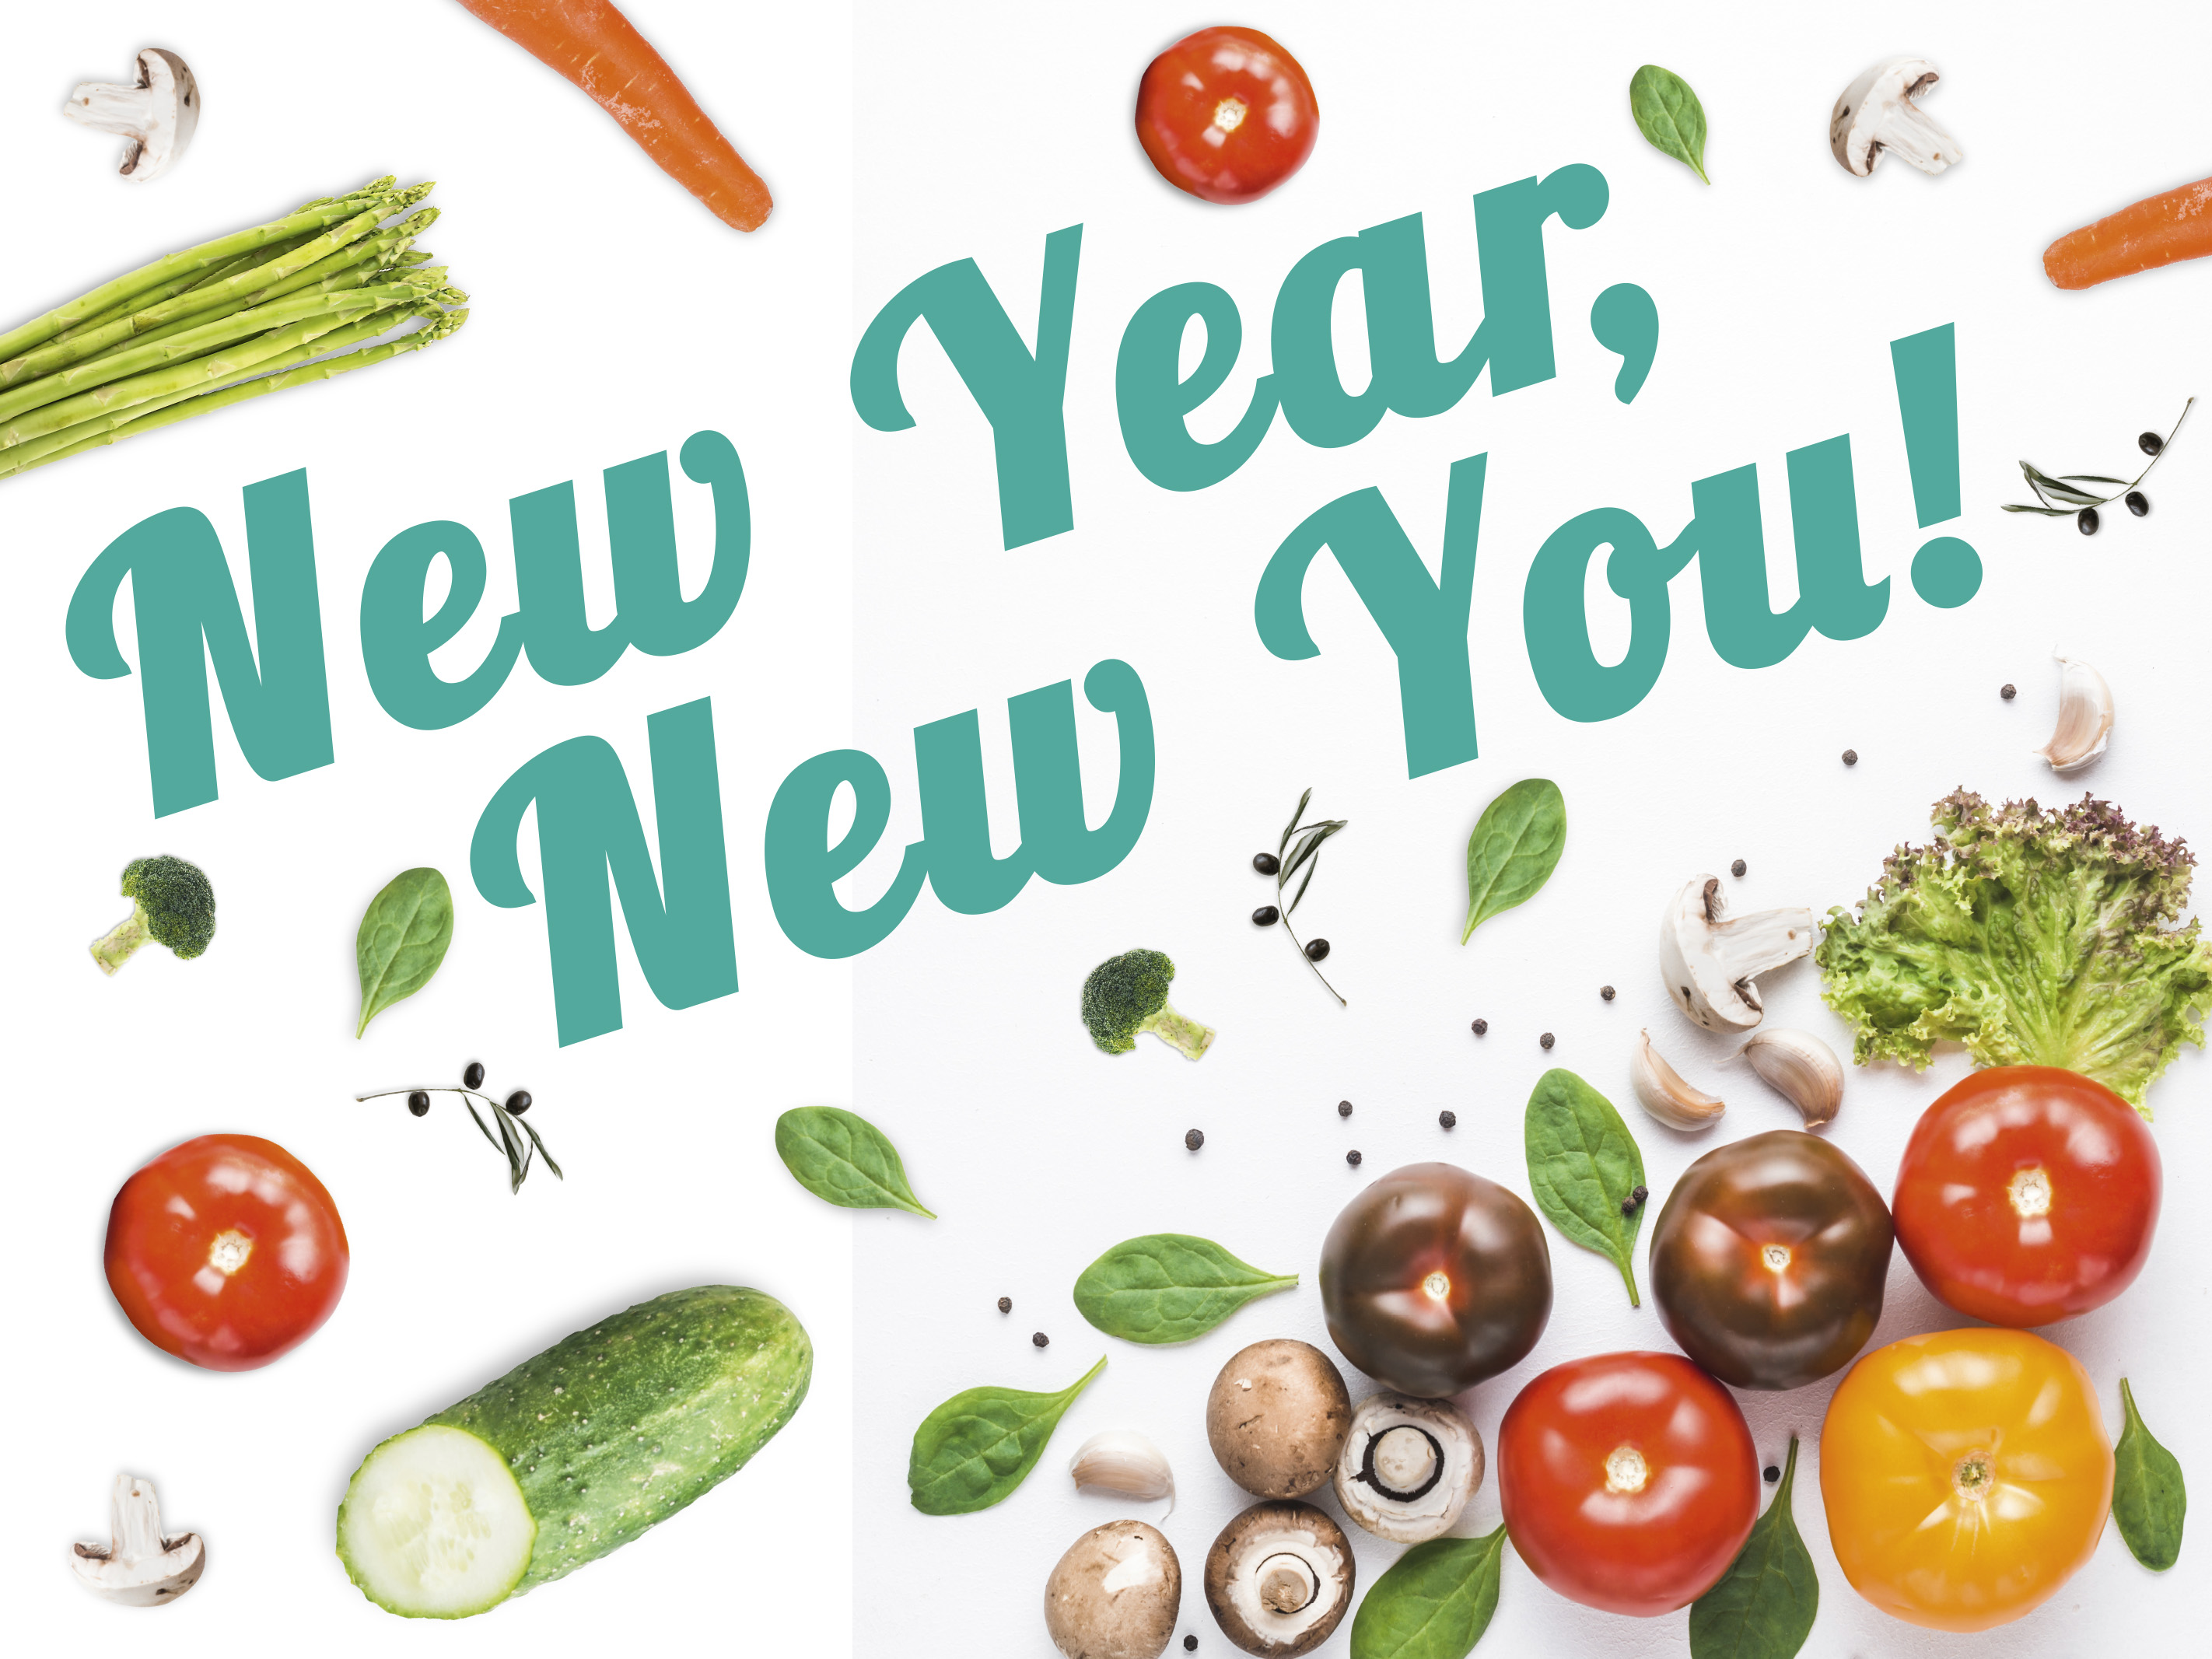 New Year, New You: Diet and Fitness Guide for 2019